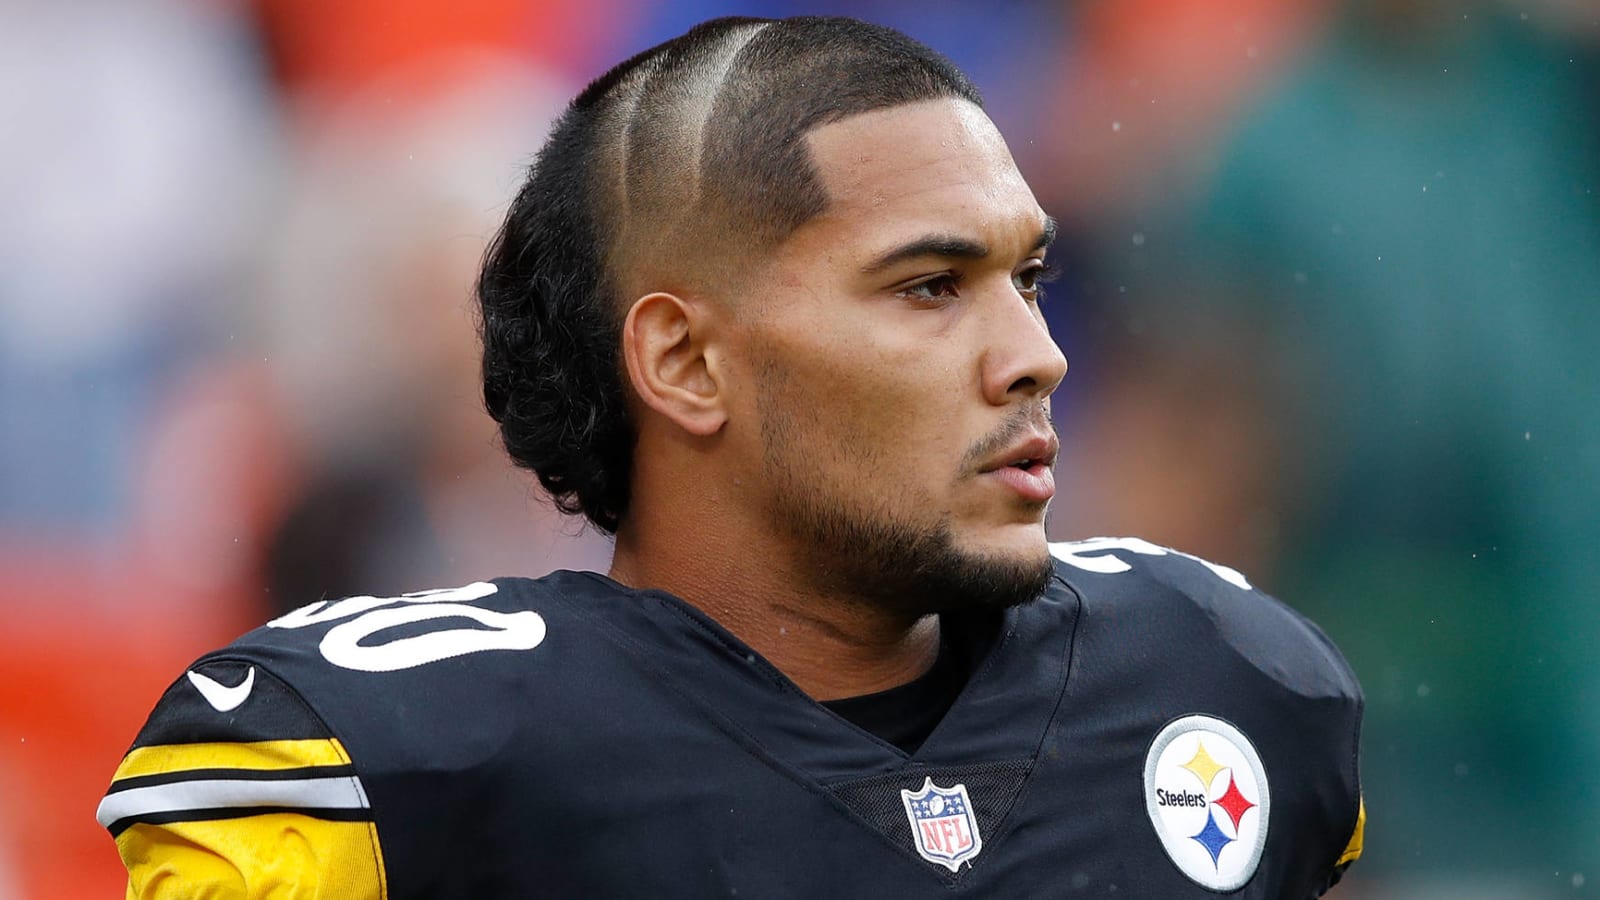 Podcast host makes good on haircut bet with James Conner